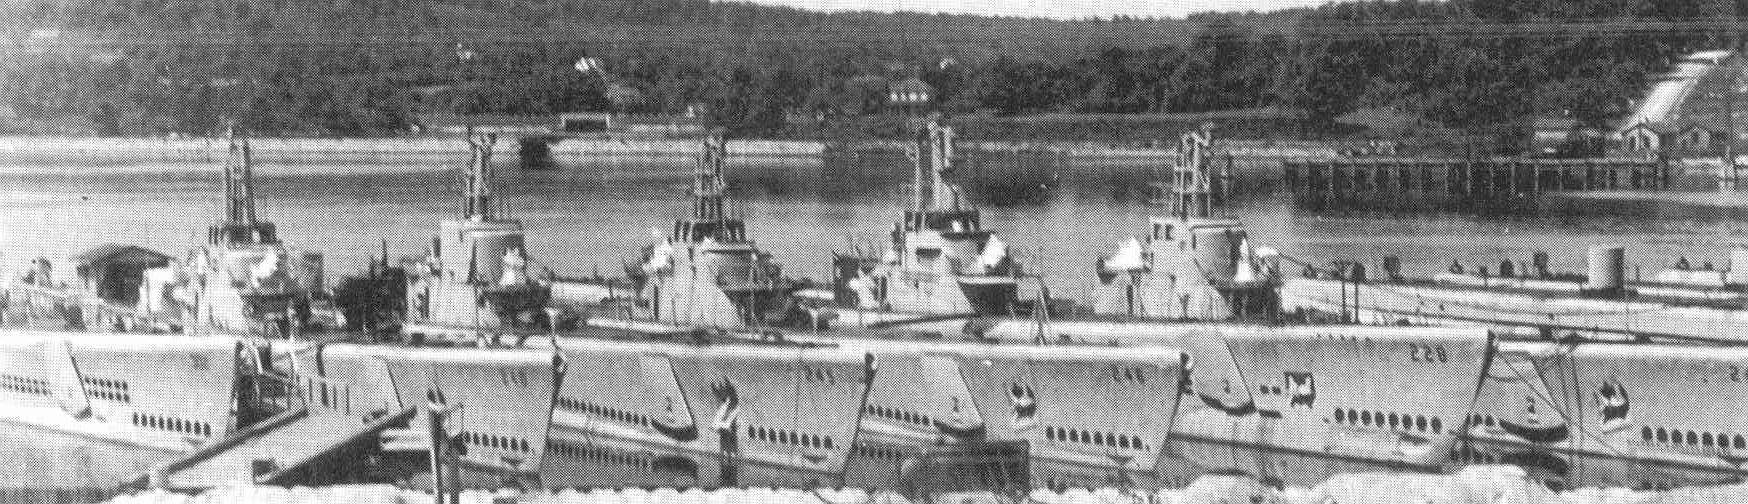 Decommissioned submarines at Groton, Connecticut, United States, circa 1947; L to R: Archer-Fish, Flasher, Cobia, Croaker, Drum, and Cavalla